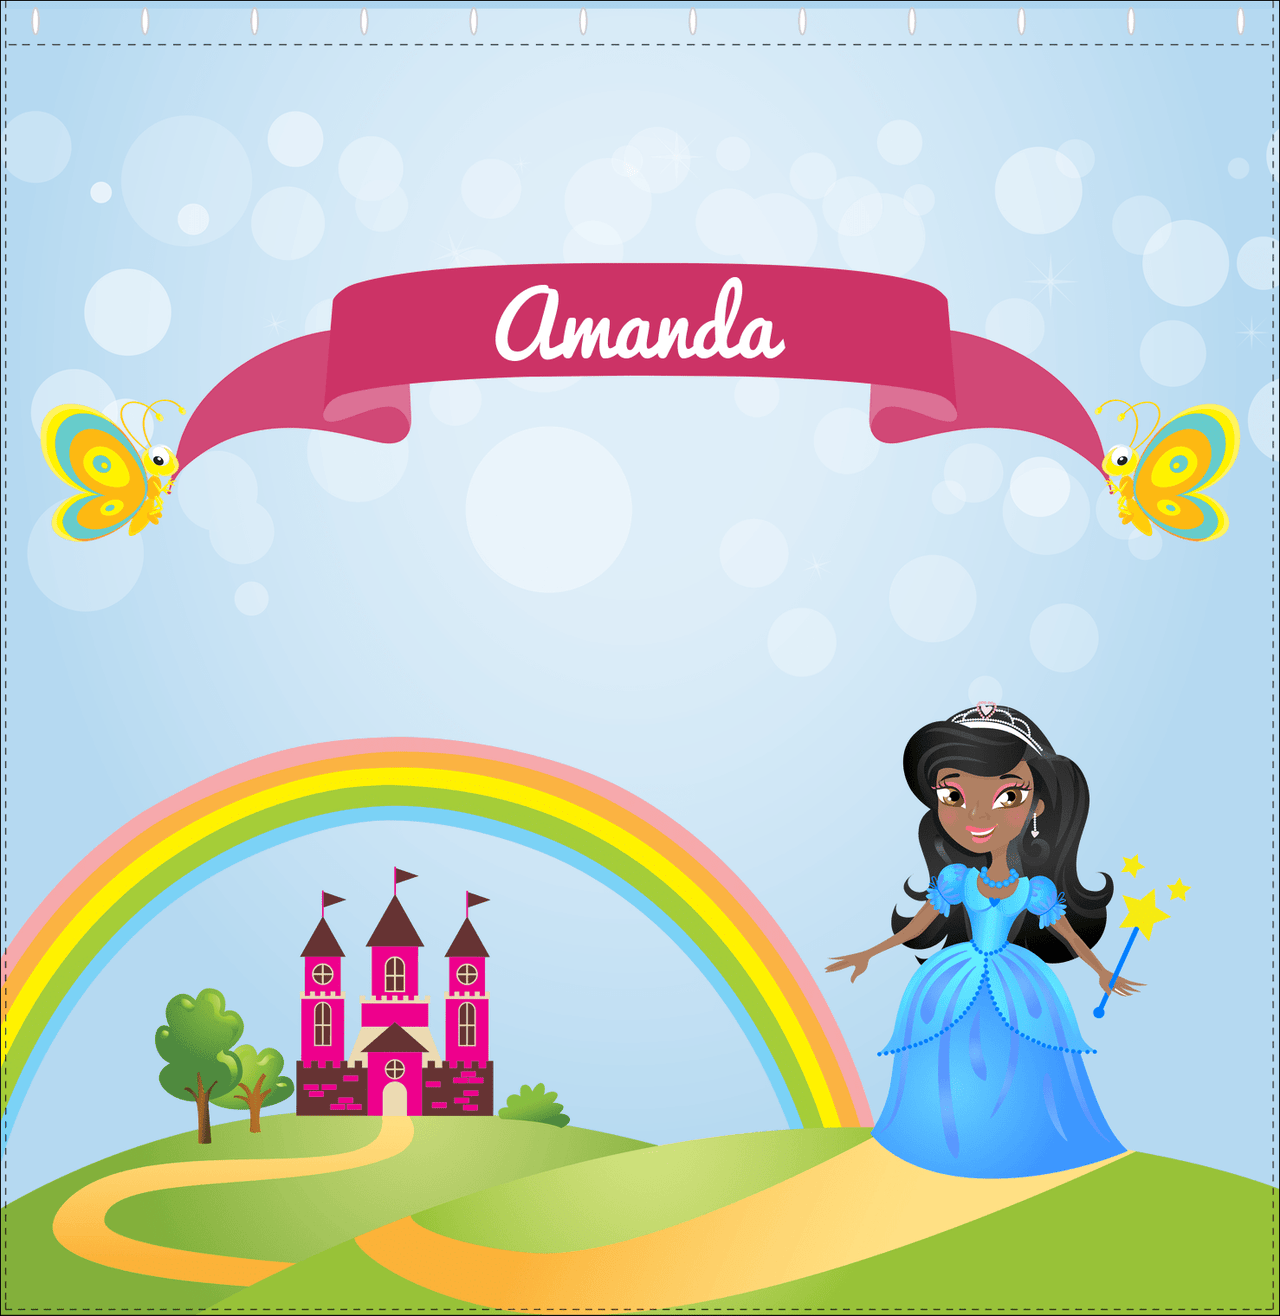 Personalized Princess Shower Curtain IV - Blue Background - Black Princess II - Decorate View